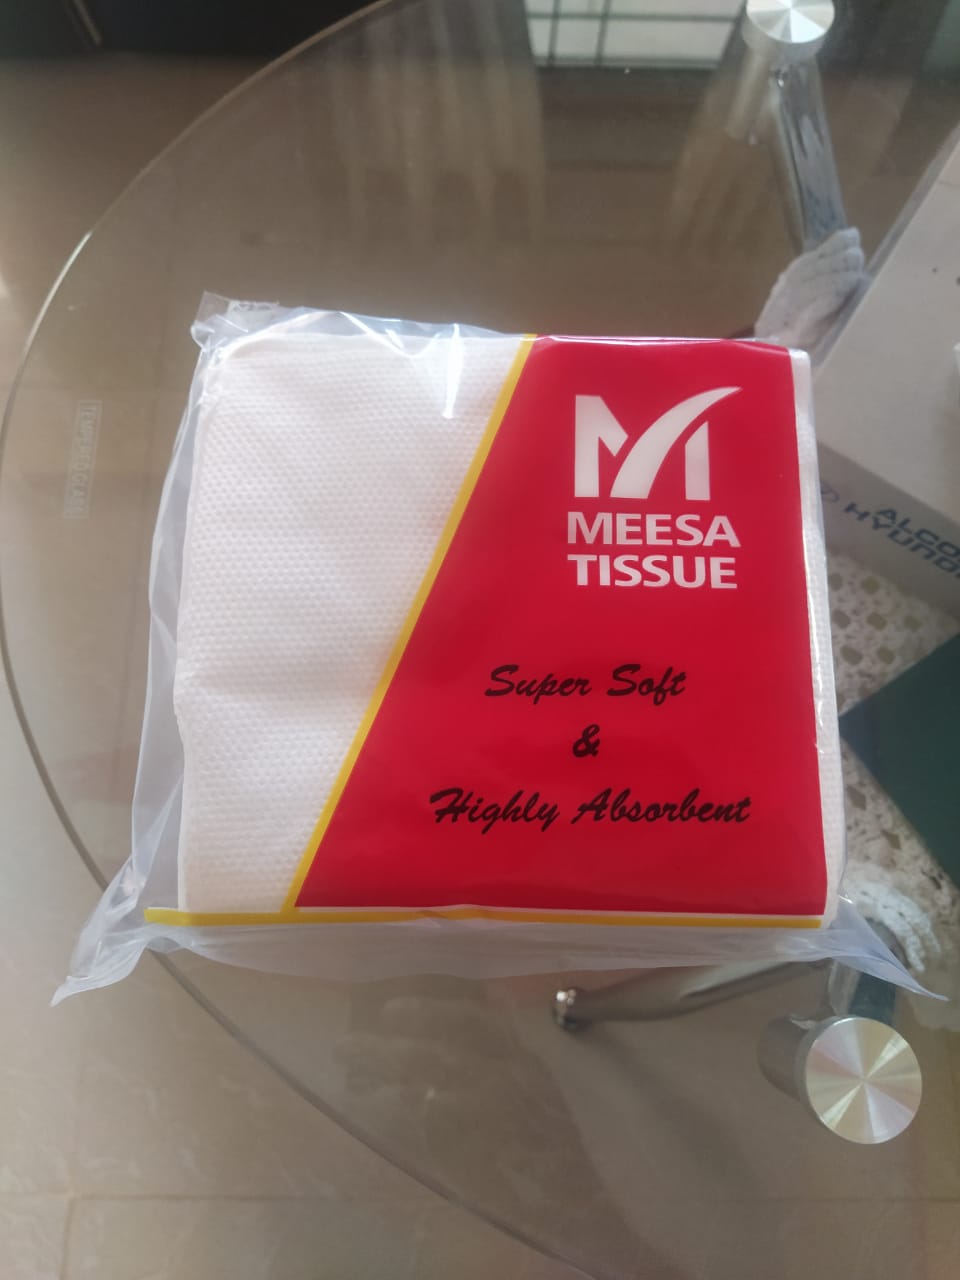 Super Soft & Highly Absorbent Tissue Paper from Meesa Enterprise